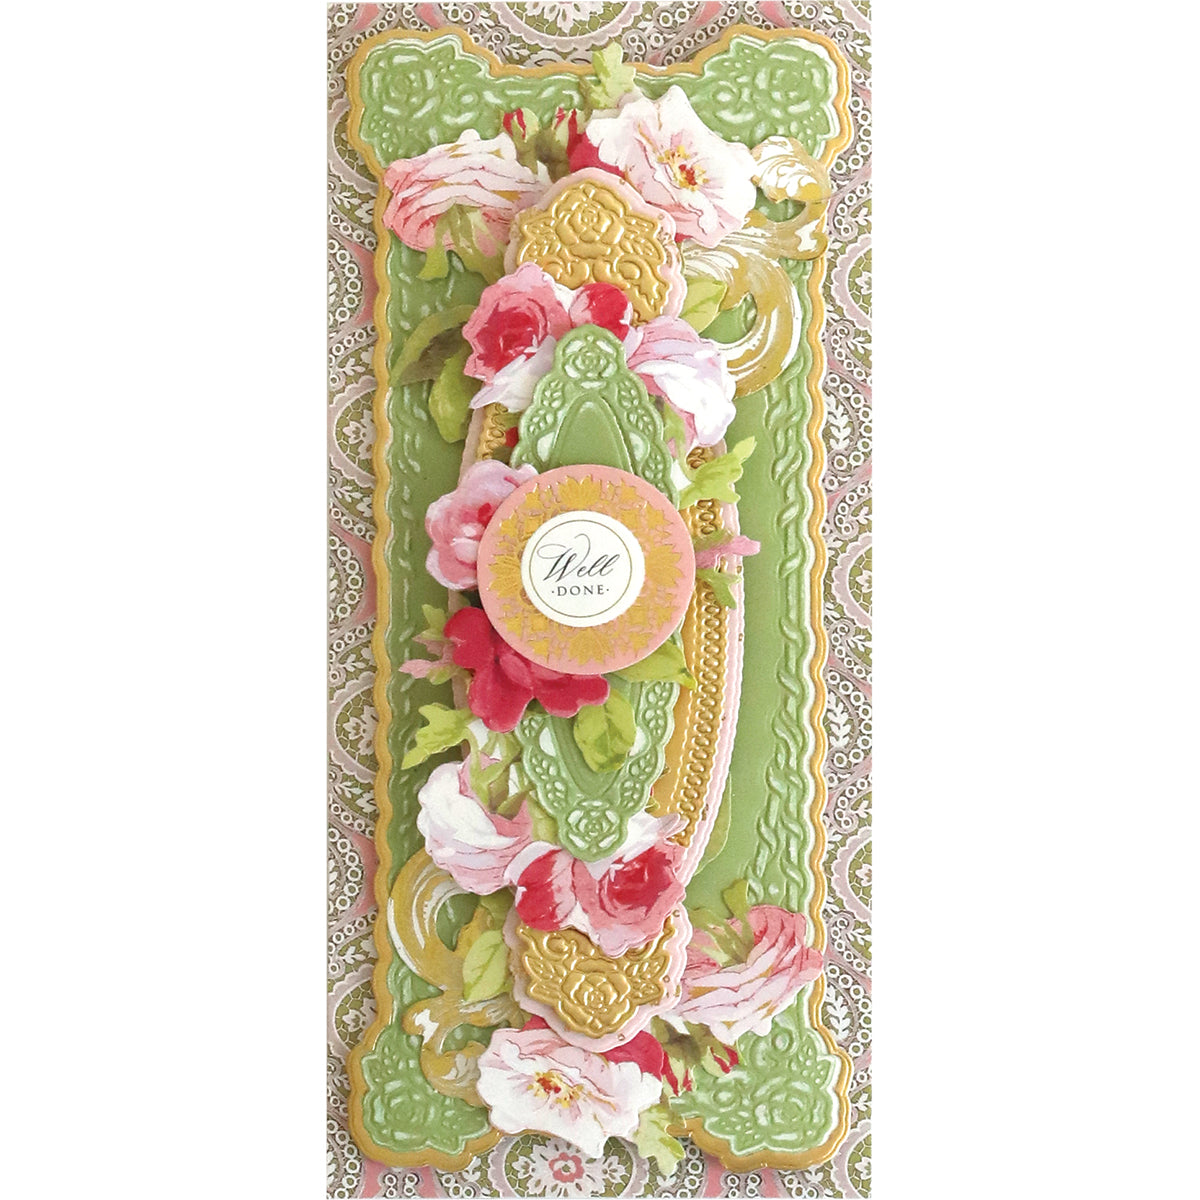 A floral card with green and pink hues, made using 3D Rose Slimline Concentric Frame Dies technology for card making by Anna Griffin.